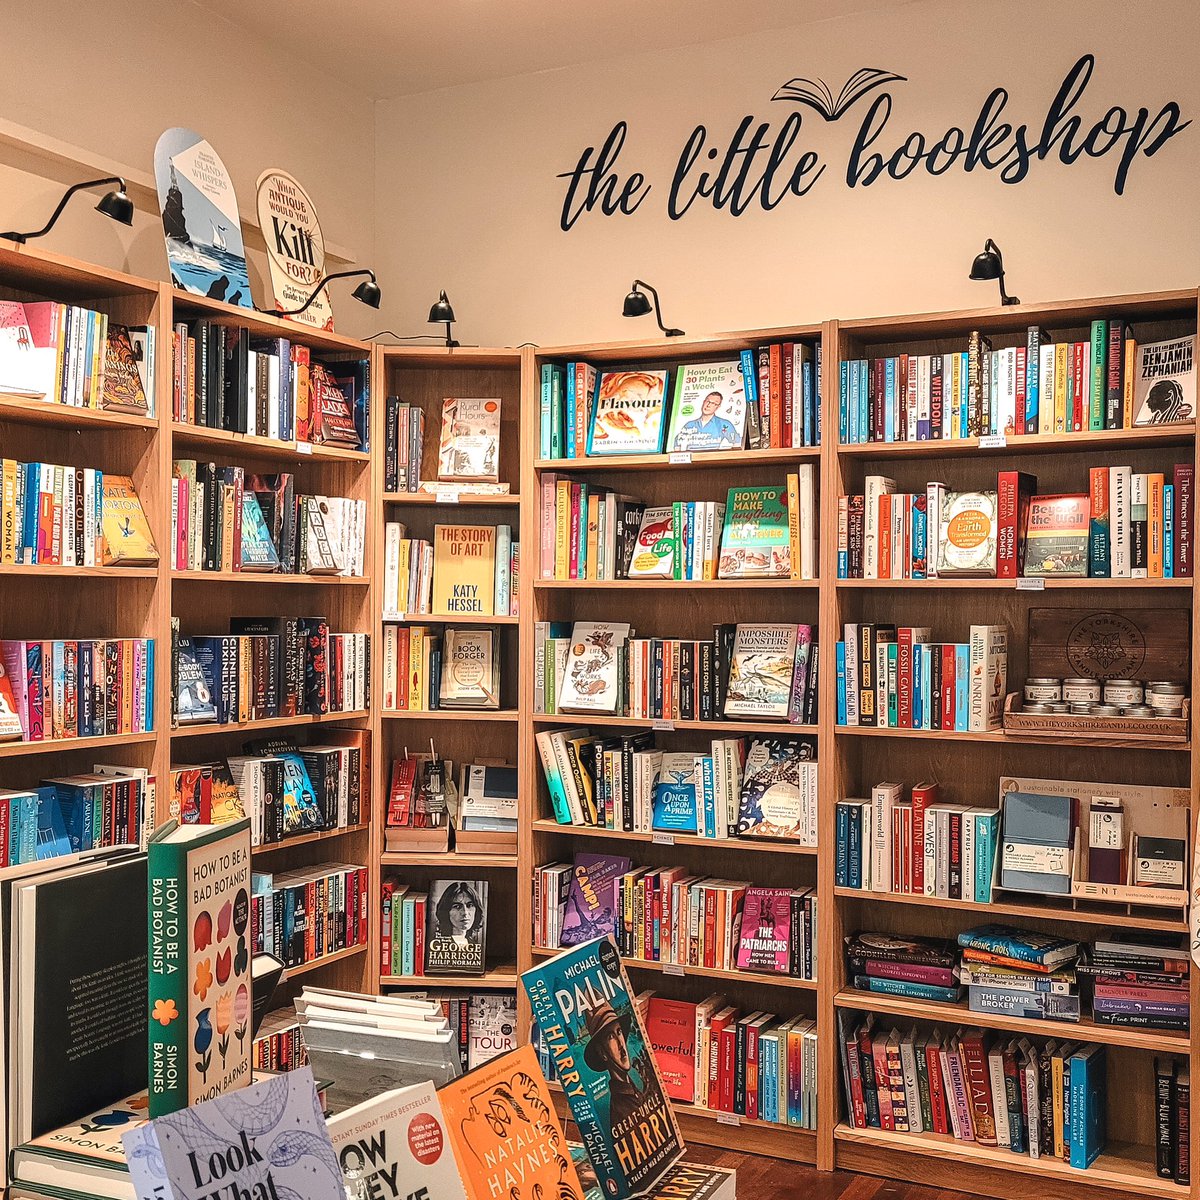 “On Saturday morning, you’ll see people queuing outside the butchers, outside the cheesemongers, outside the greengrocers...  I think people come to us for that kind of independent shop experience.”

Our full #BookshopSpotlight interview with @littlebookshops goes live tomorrow!